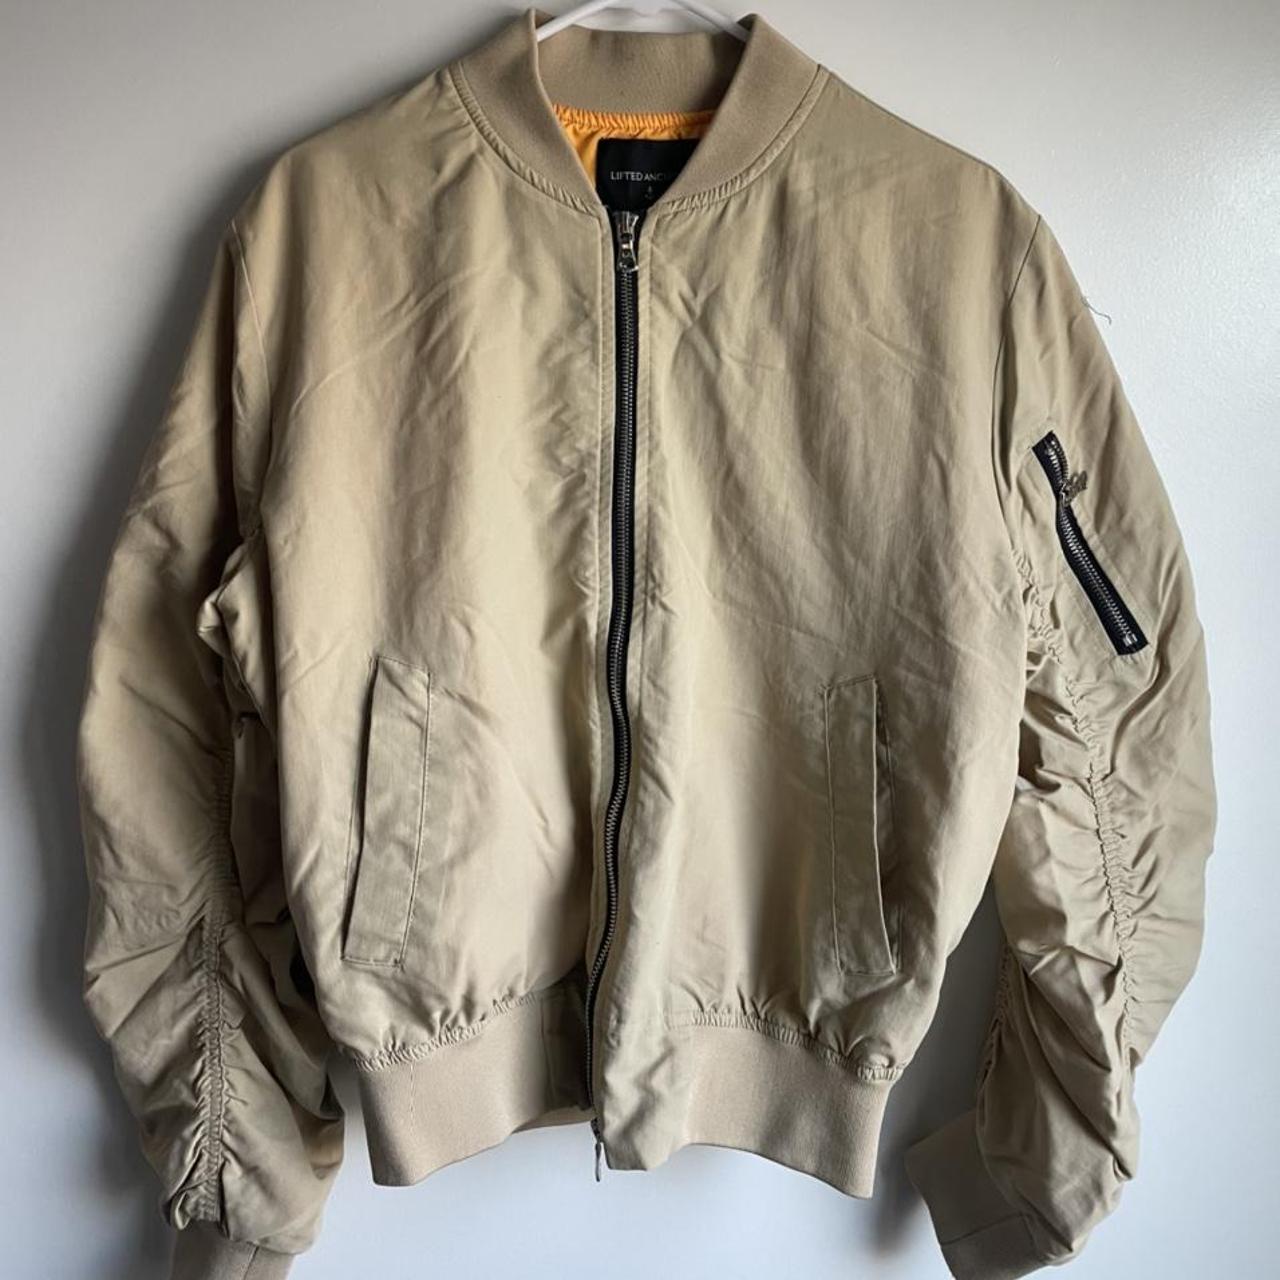 Product Image 2 - Lifted Anchors Cream Bomber Jacket
Price: